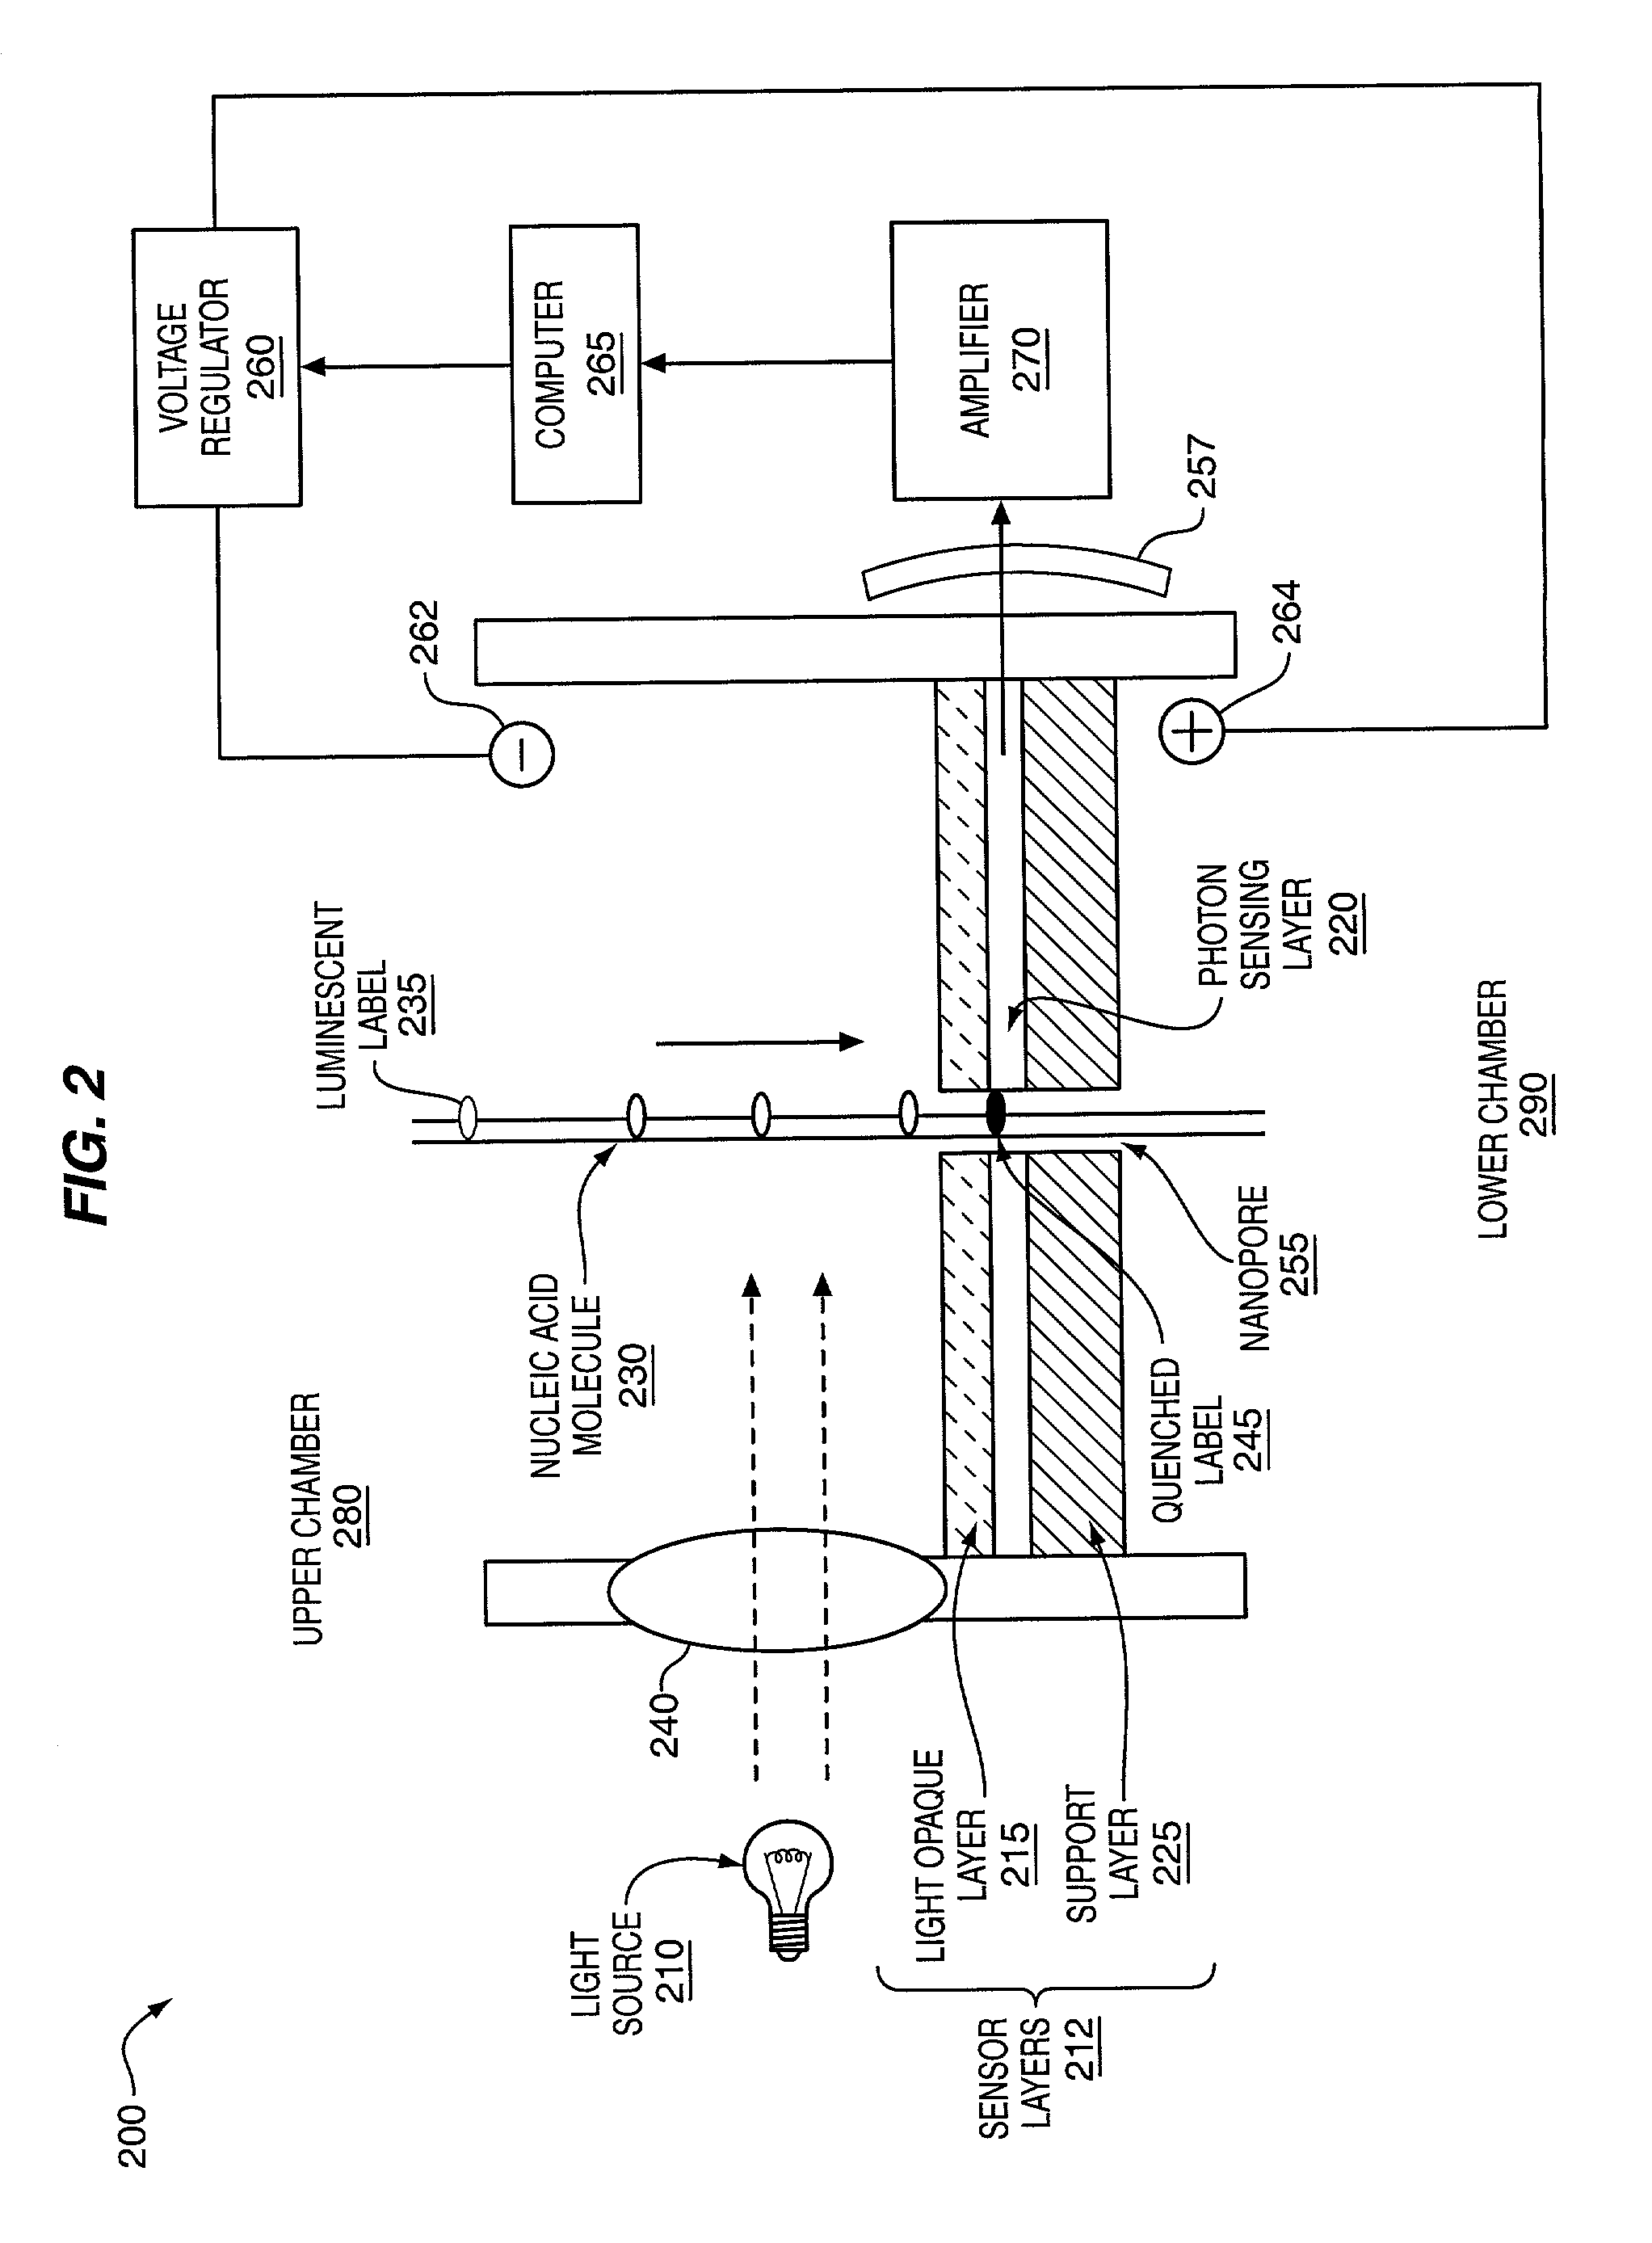 Method and apparatus for nucleic acid sequencing and identification